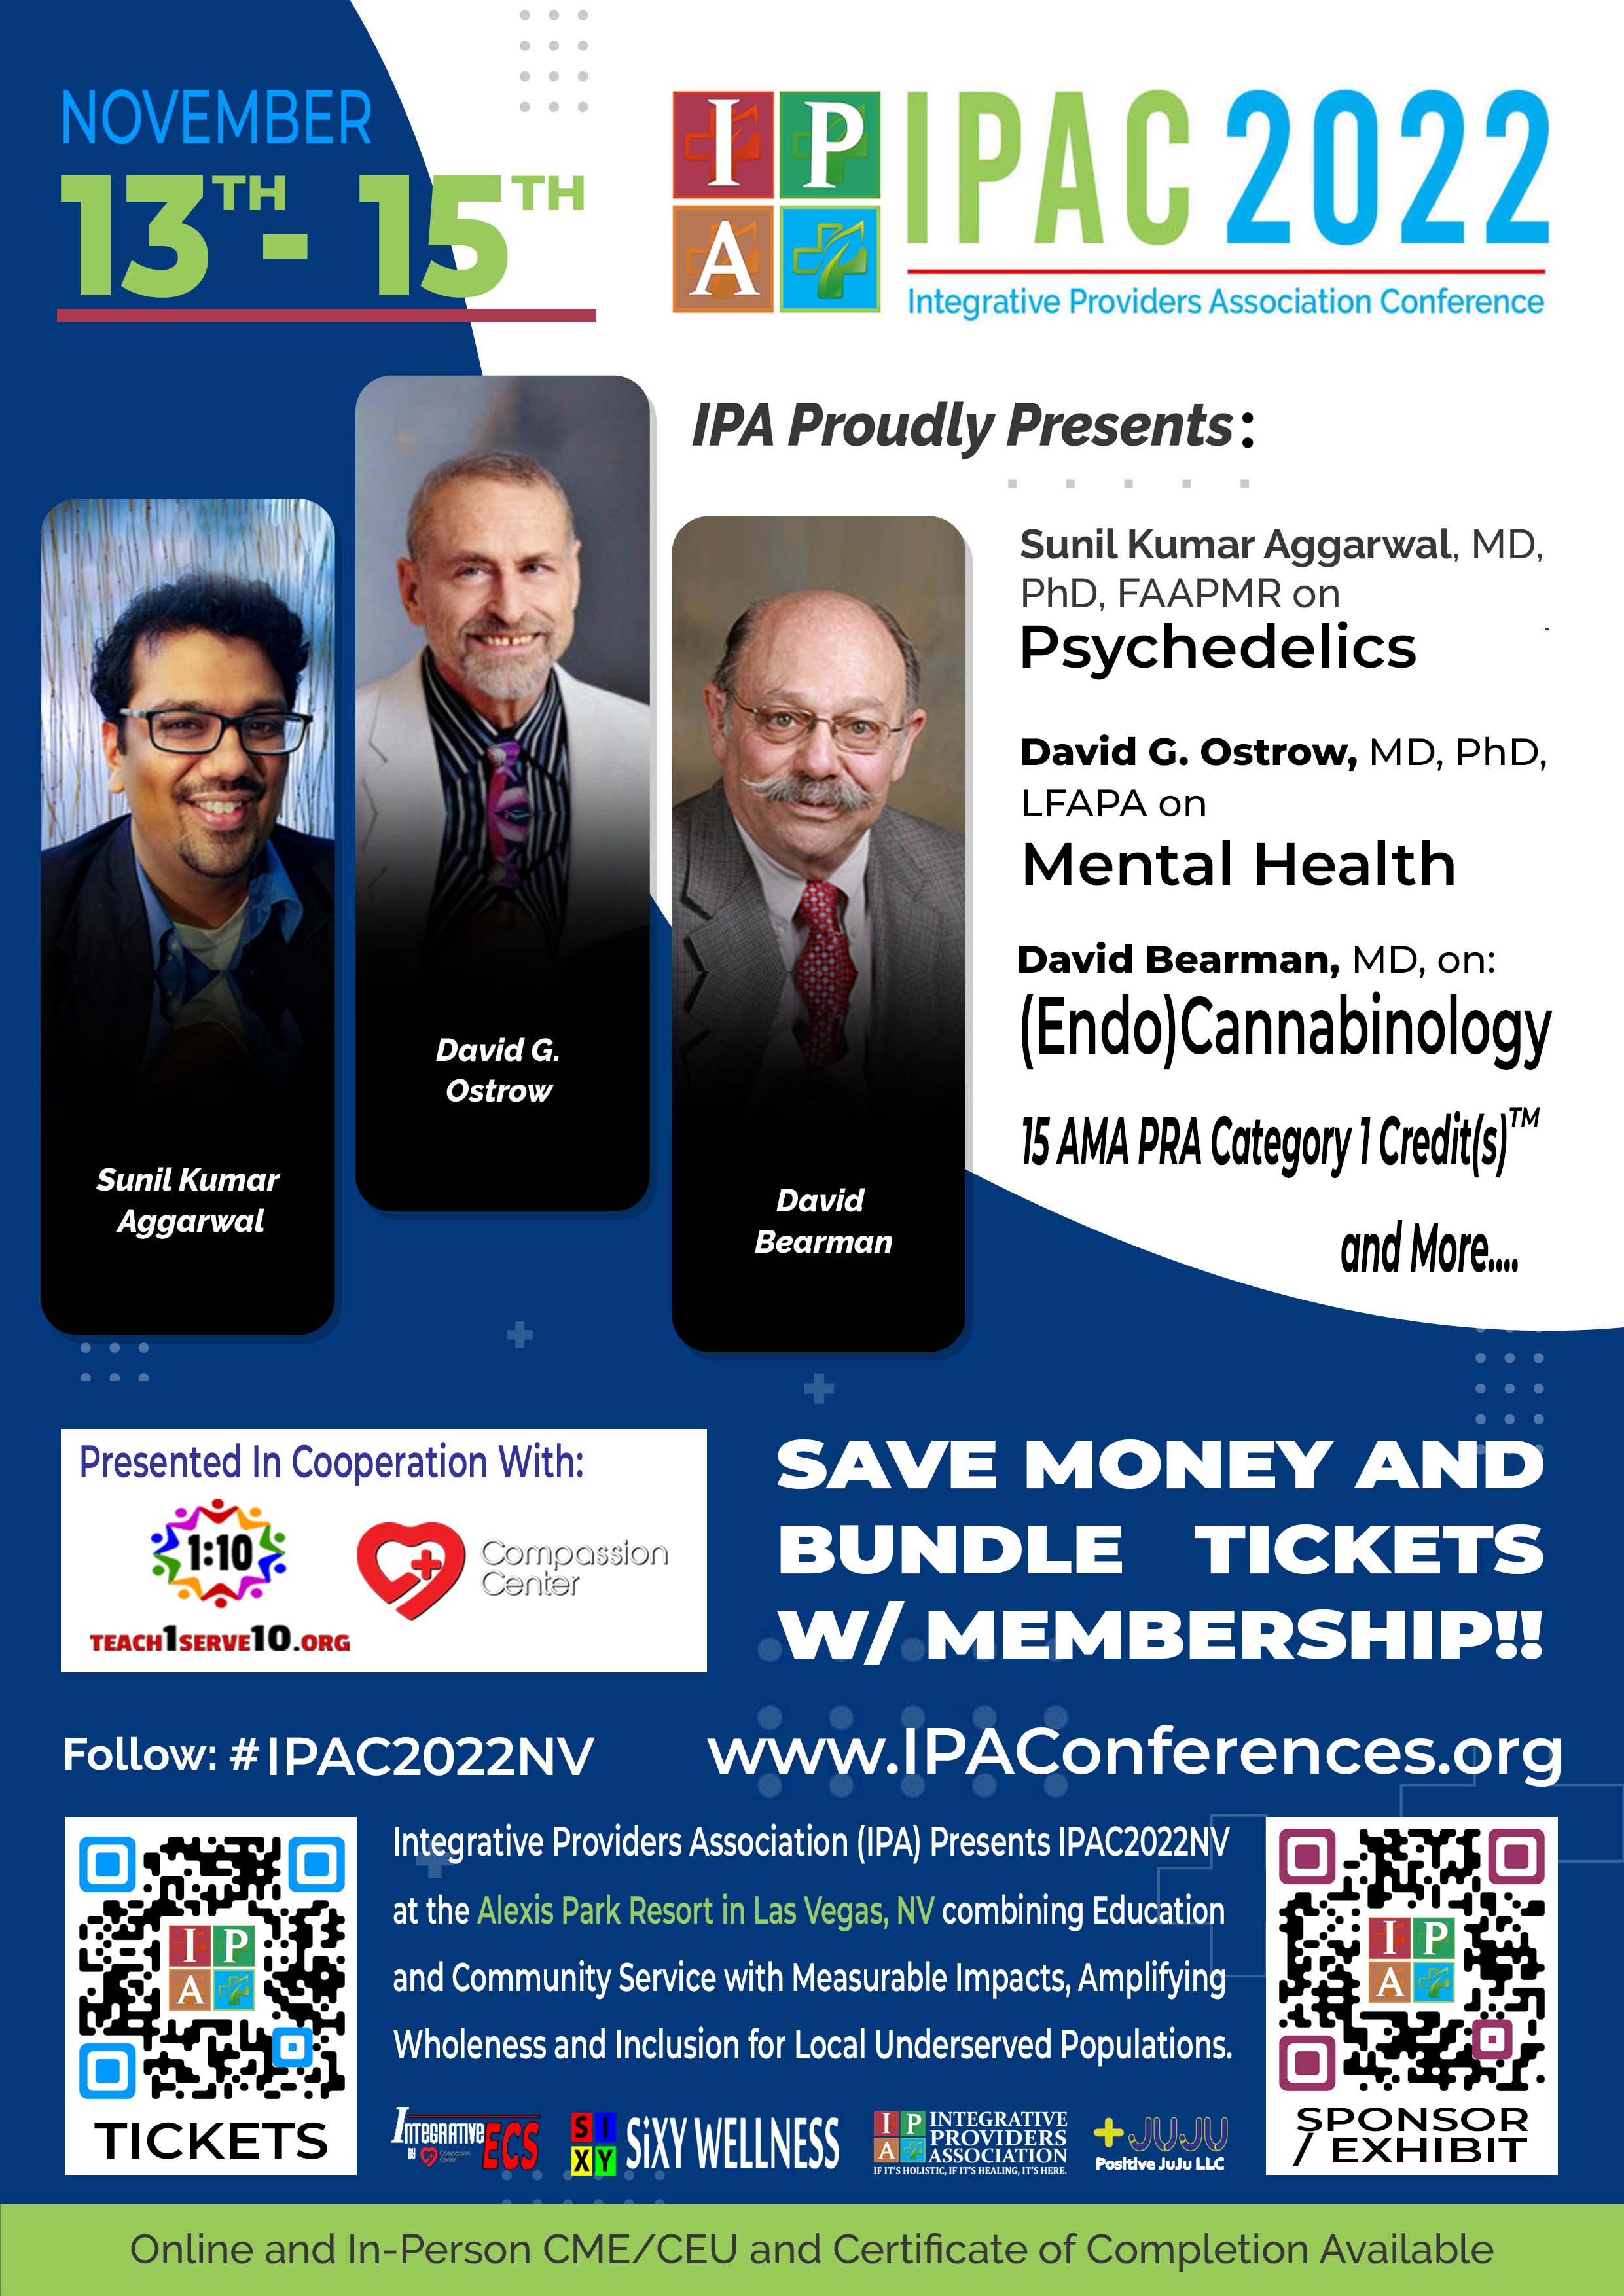 The IPA Confirms IPAC2022NV Medical Conference at Alexis Park Resort in Las Vegas, NV with CME on Cannabis, Psilocybin, Psychedelics, Mental Health & More